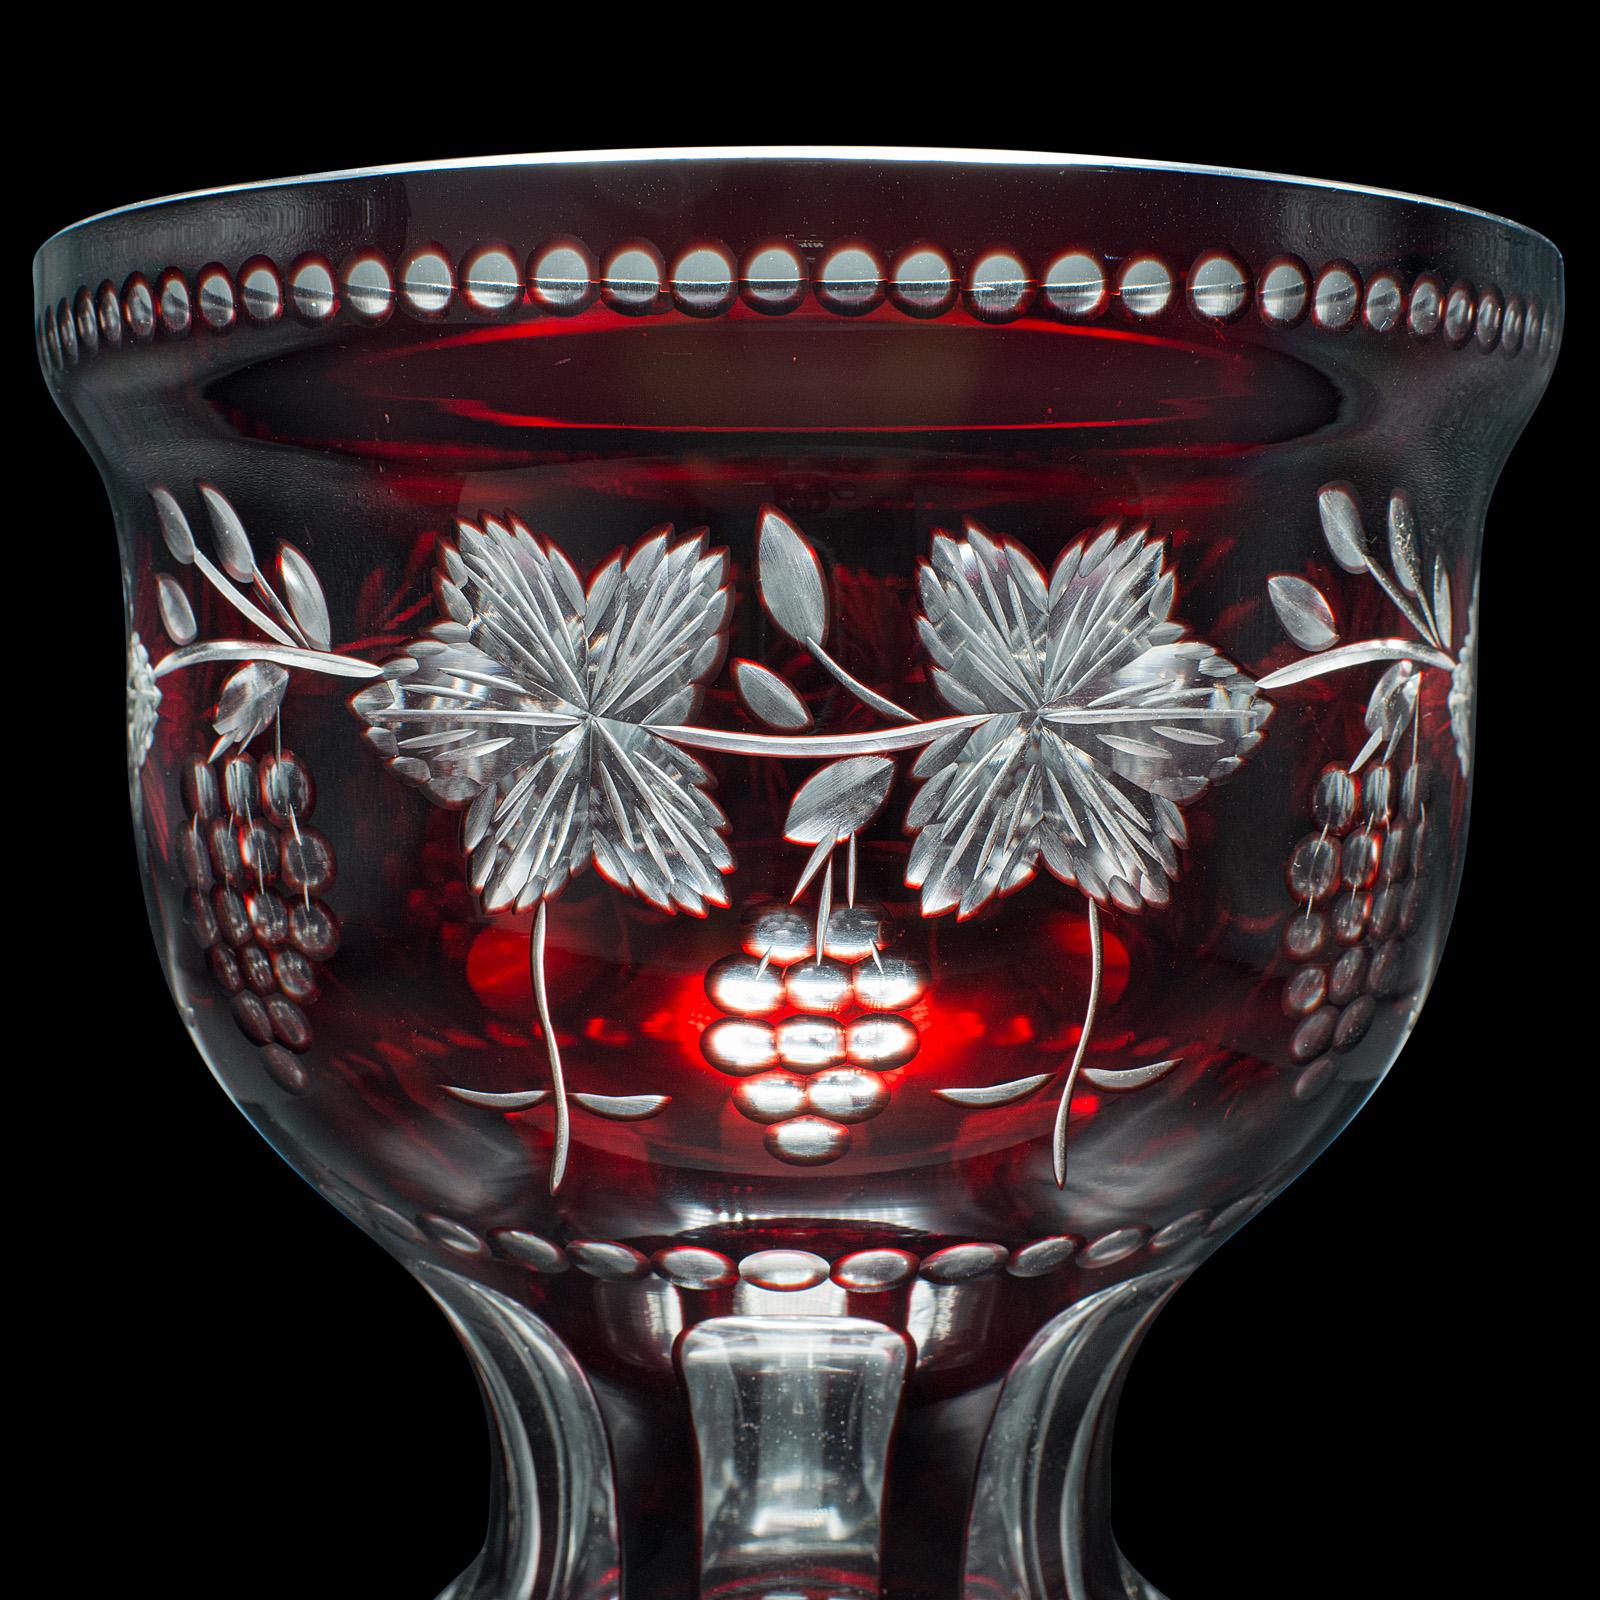 Antique Ruby Pedestal Bowl, Continental, Glass, Decorative Ice Bucket, C.1920 For Sale 2